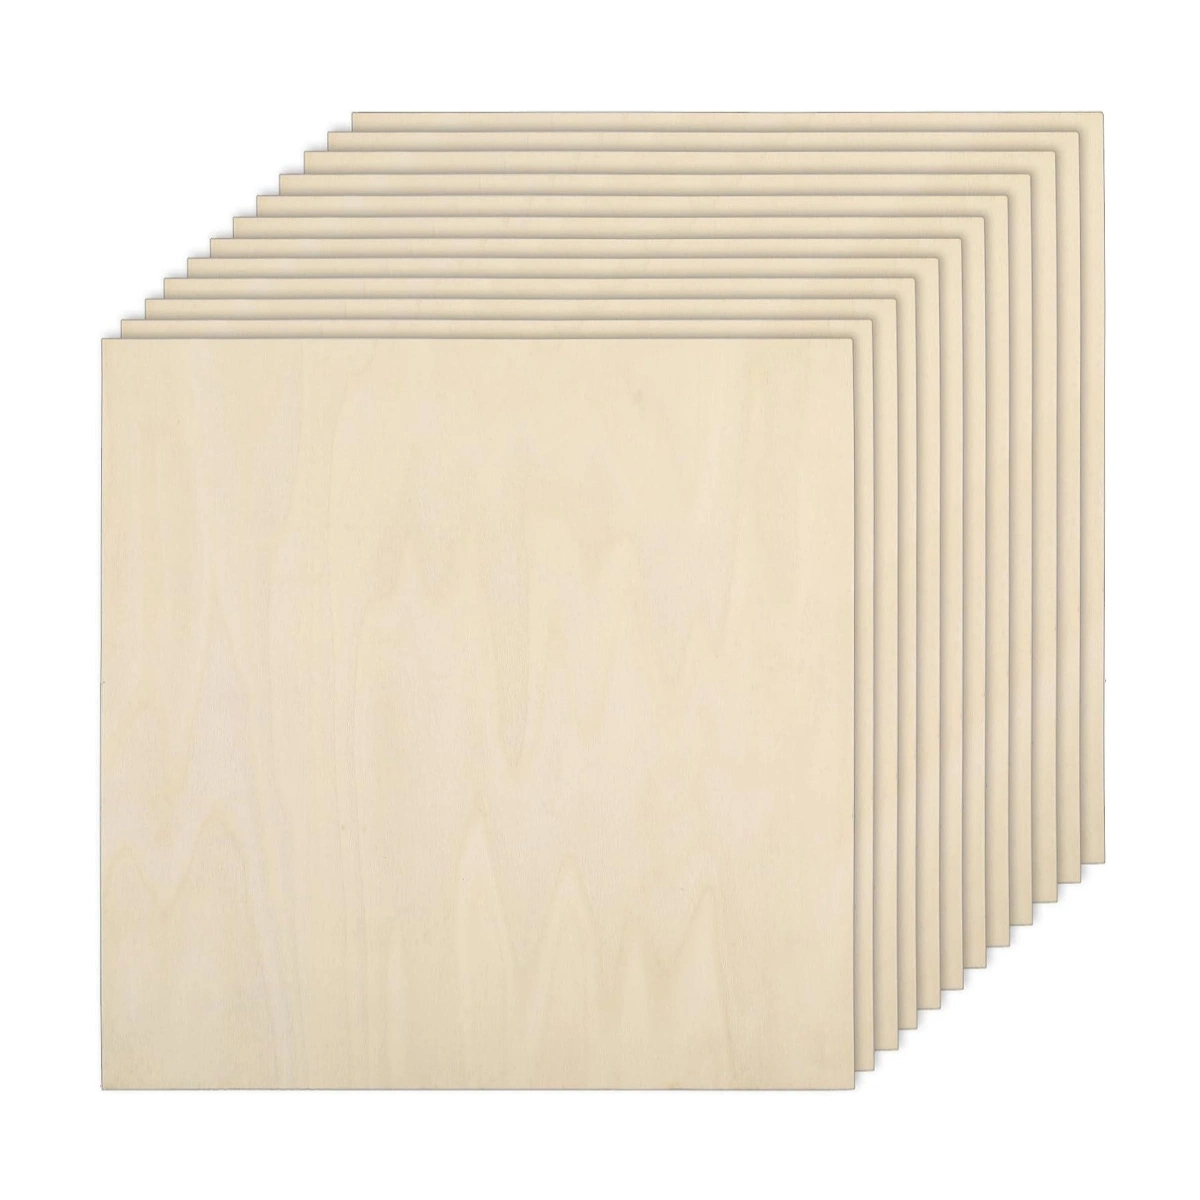 Square Basswood Plywood Sheets Unfinished 12 Inch Board for Grave Painted